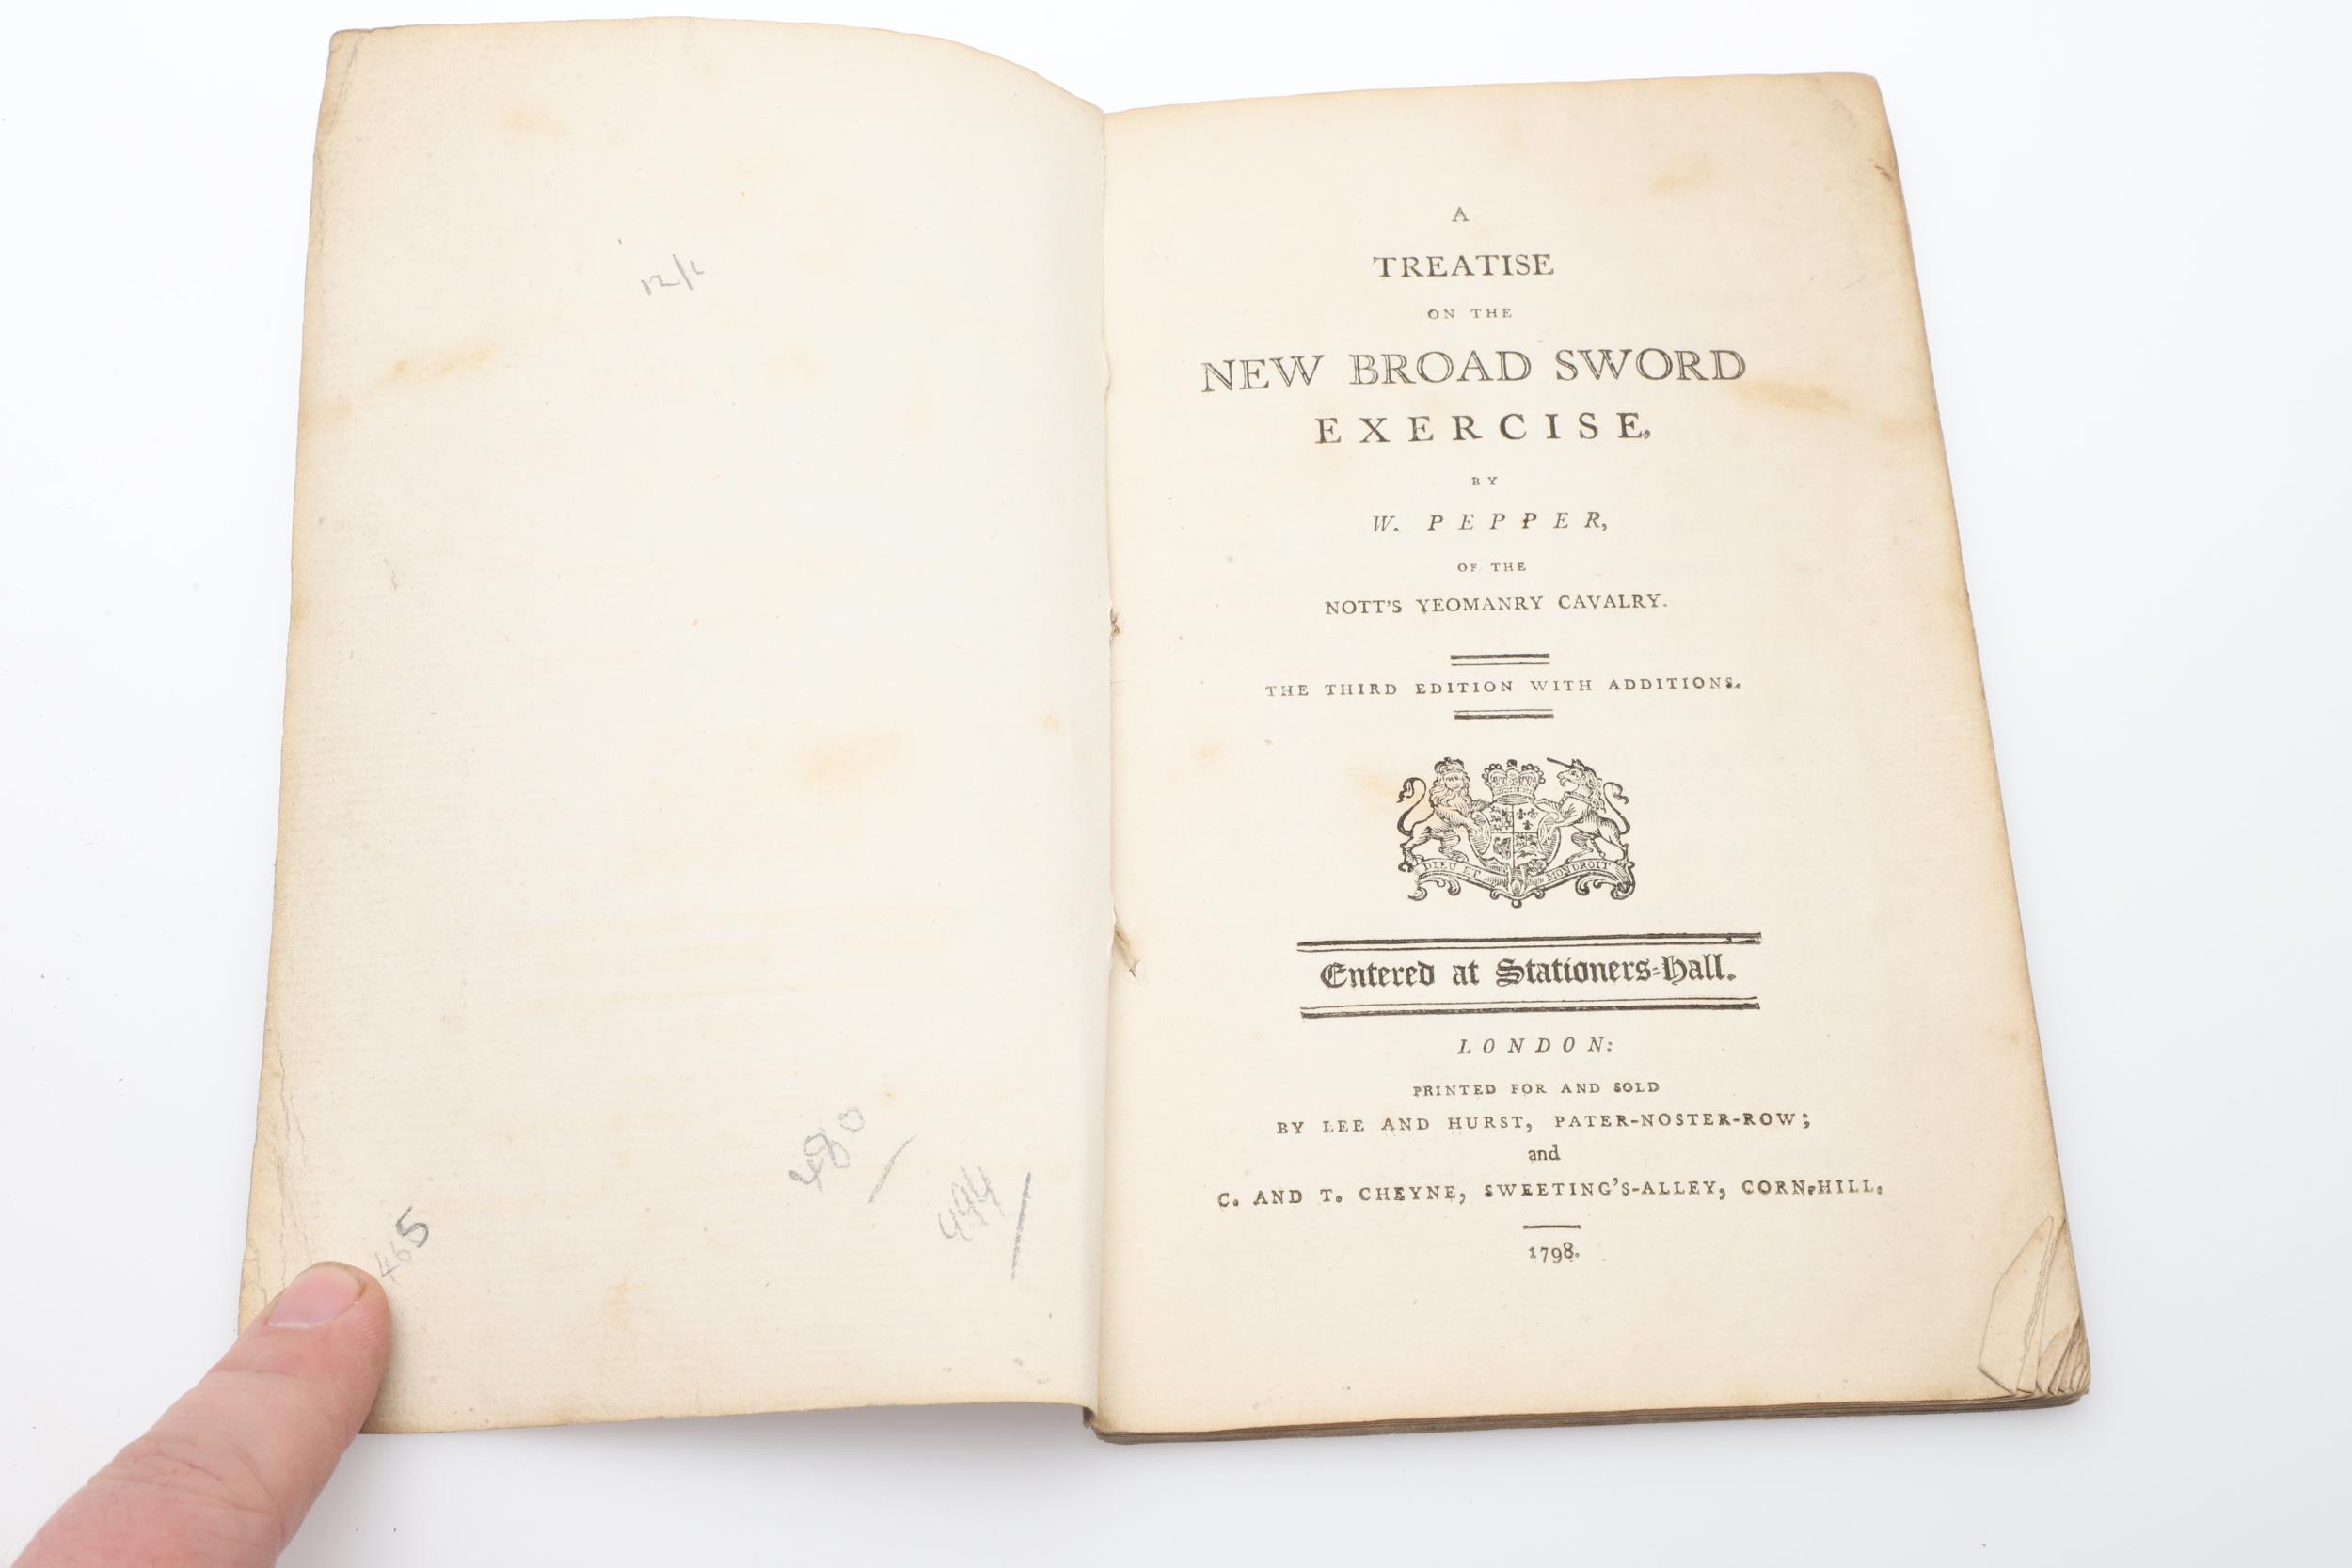 RULES AND REGULATIONS FOR THE SWORD EXERCISE OF THE CAVALRY, 1796. AND TREATISE ON THE NEW BROAD SWO - Image 12 of 16